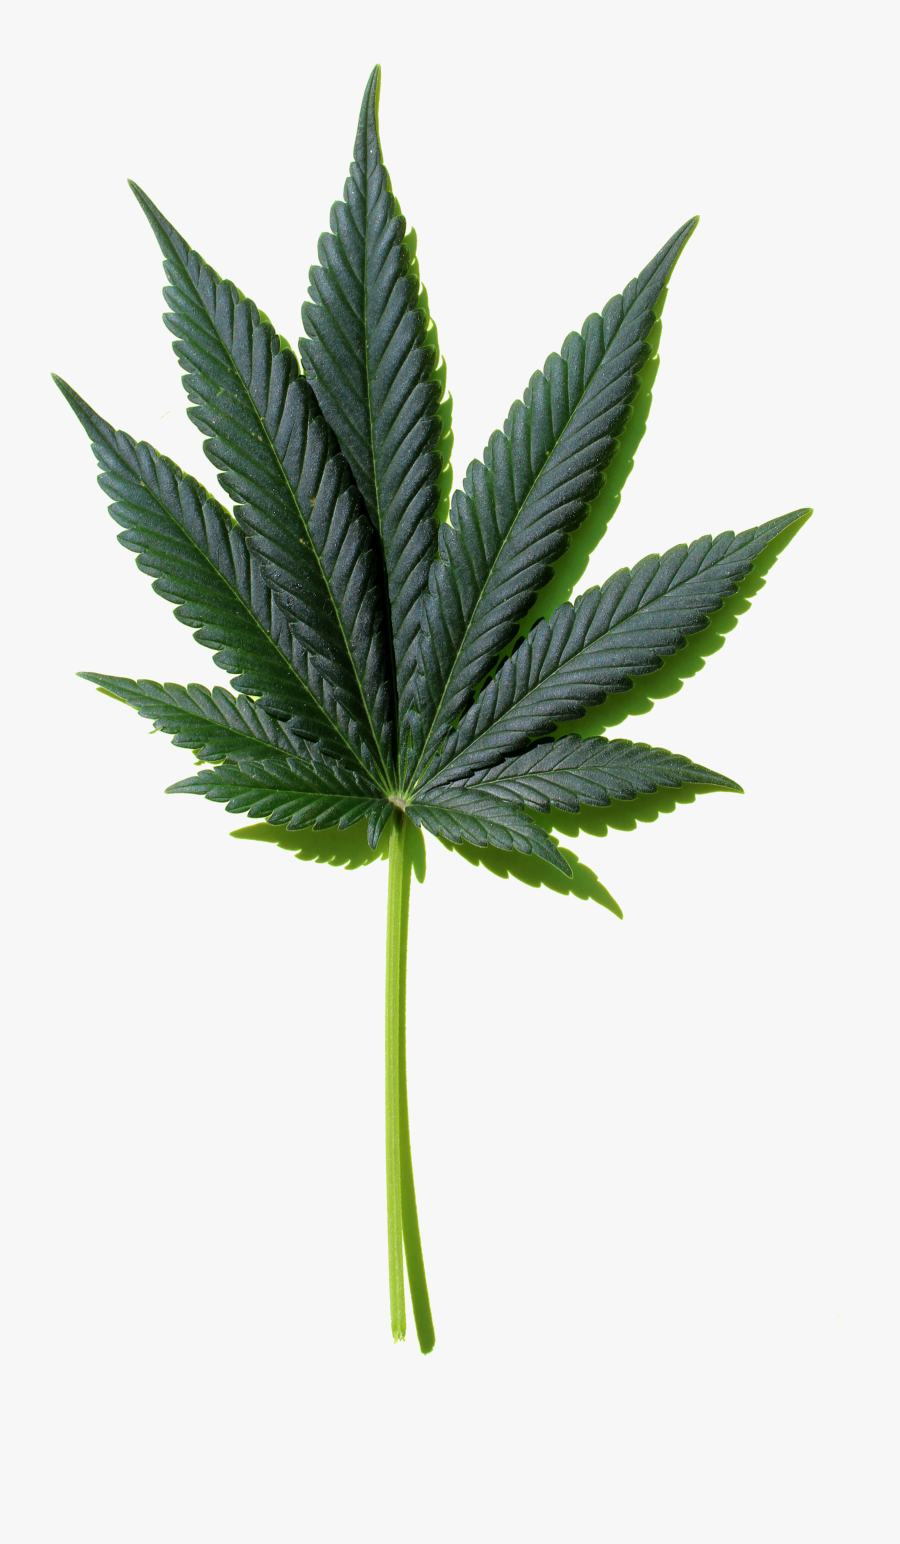 Marijuana Leaf Image Free To Use Creative Commons - Weed Png, Transparent Clipart